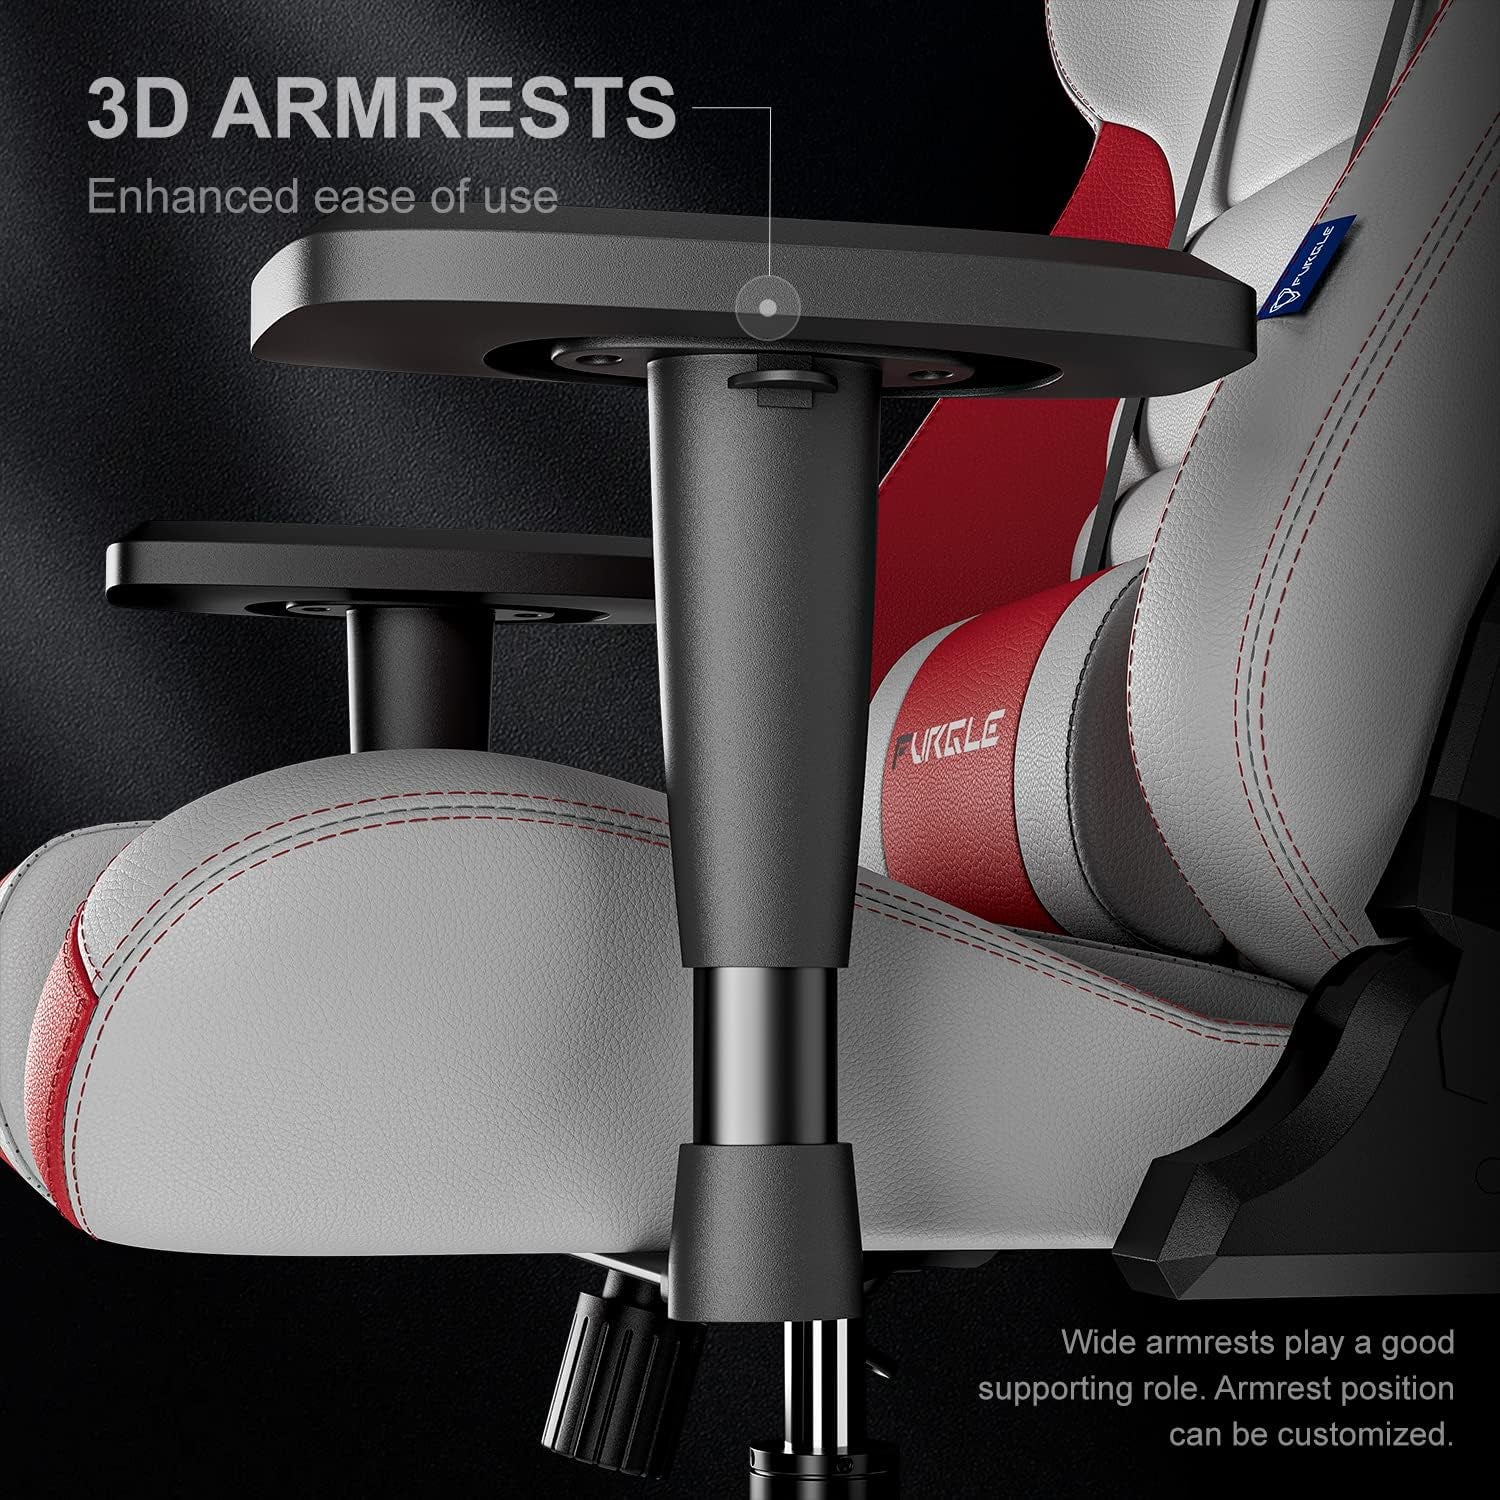 Gaming Chair Computer Chair - Racing Style High-Back Office Chair - PU Leather Ergonomic Video Game Chairs - Adjustable Armrests - Headrest and Lumbar Support - Rocking Mode -White/Red